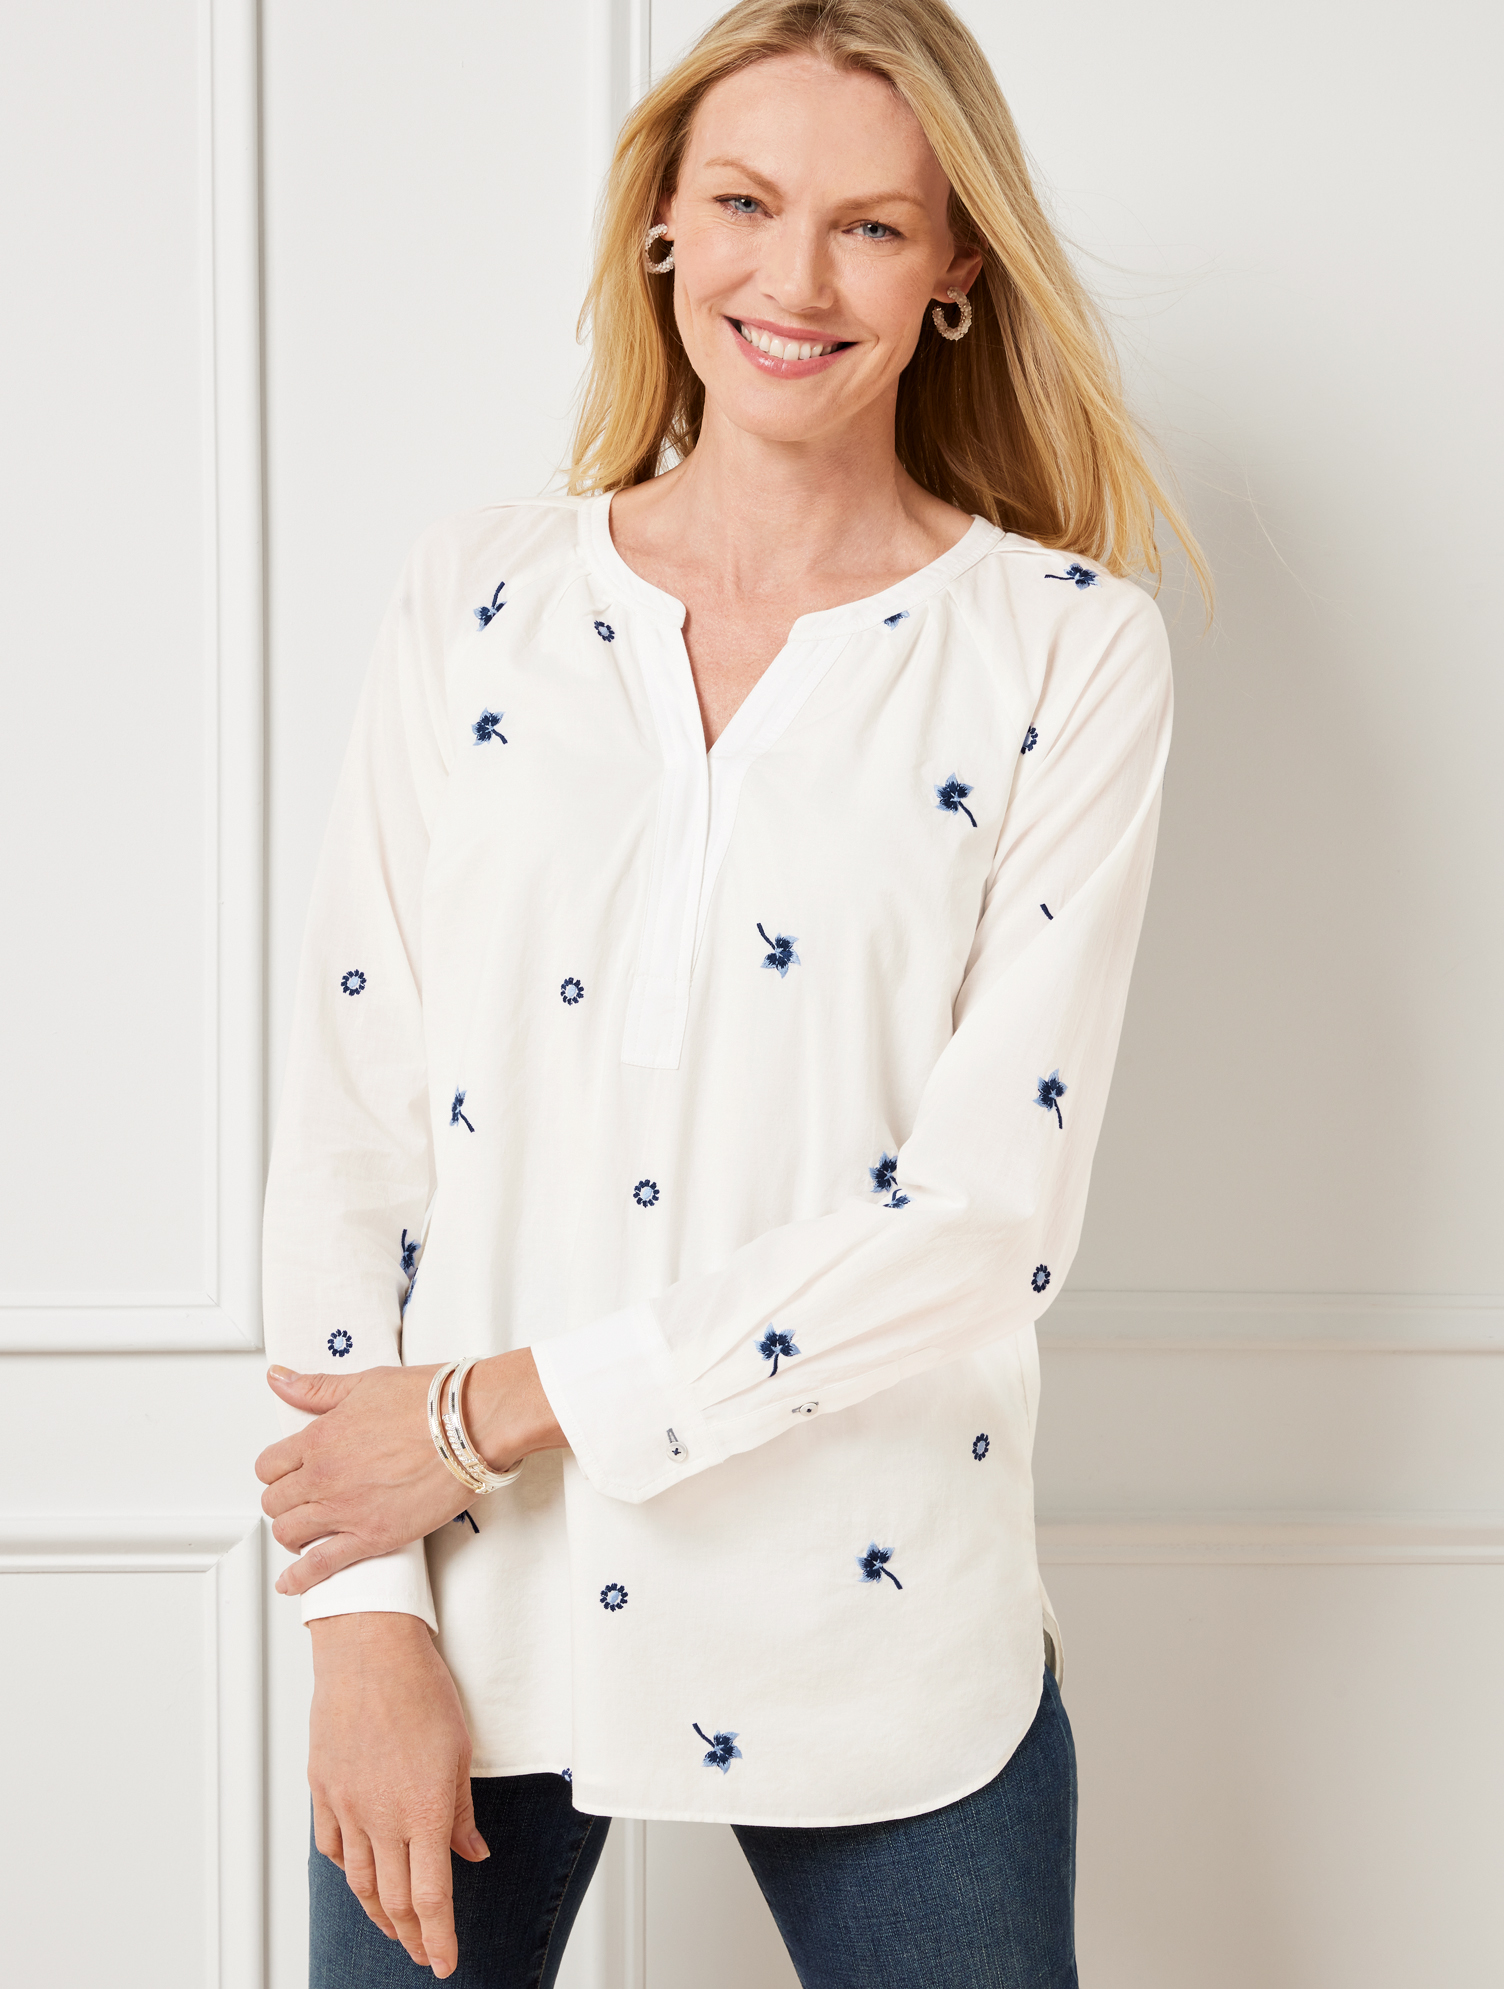 Talbots Embroidered Popover Shirt - Tossed Ditsy - Ivory - 1x